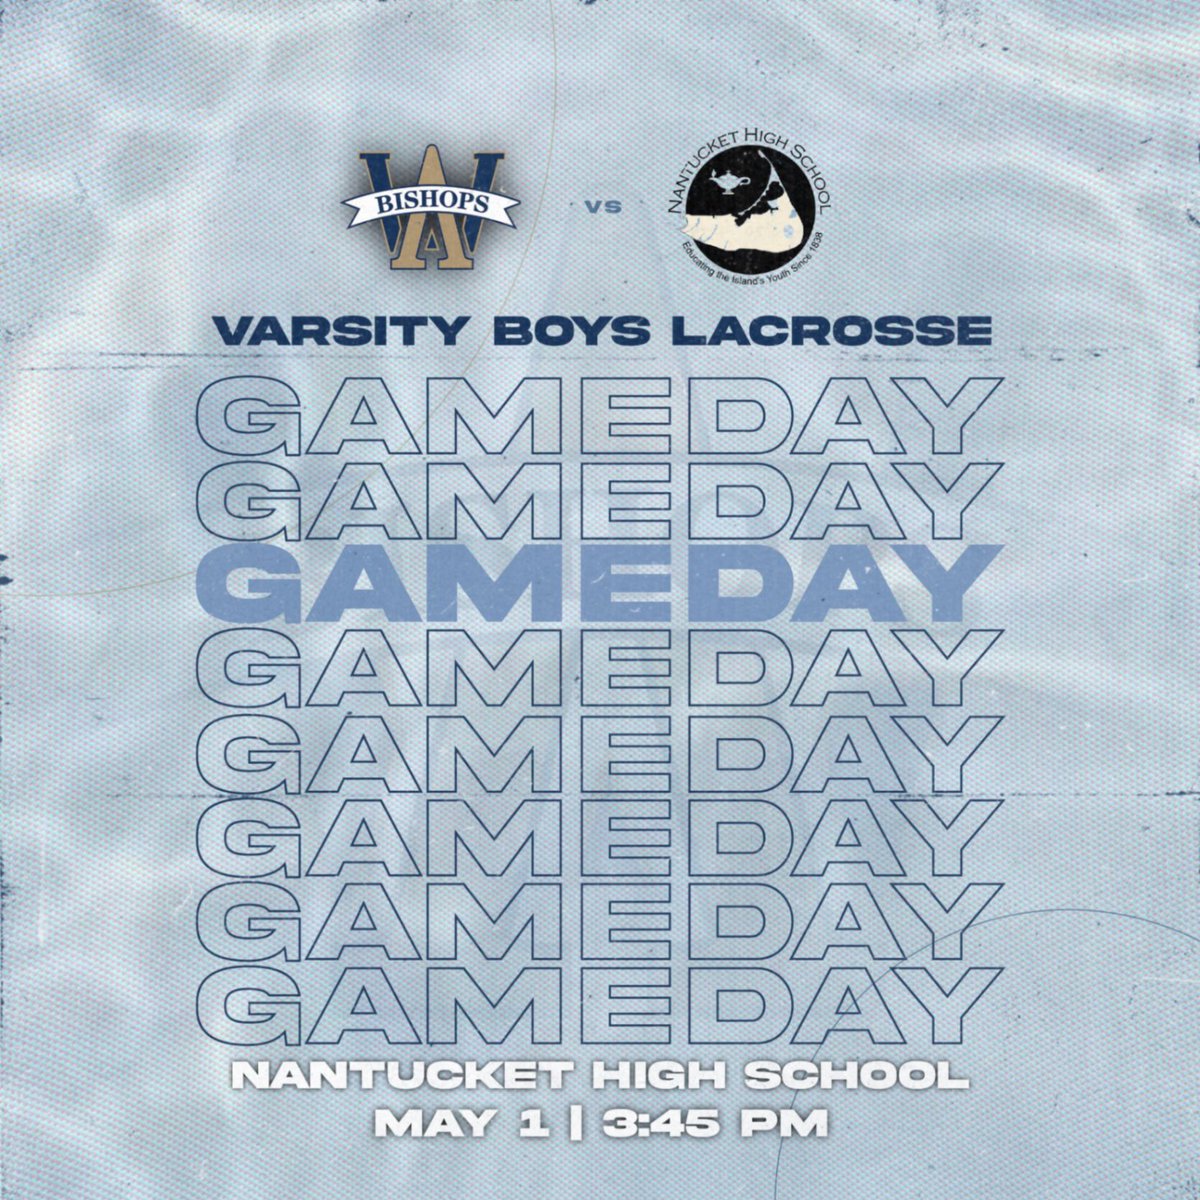 BOYS LACROSSE: The Bishops head on the ferry to Nantucket to take on the Whalers today! Varsity only at 3:45pm! #rollbills @awhs_boyslax